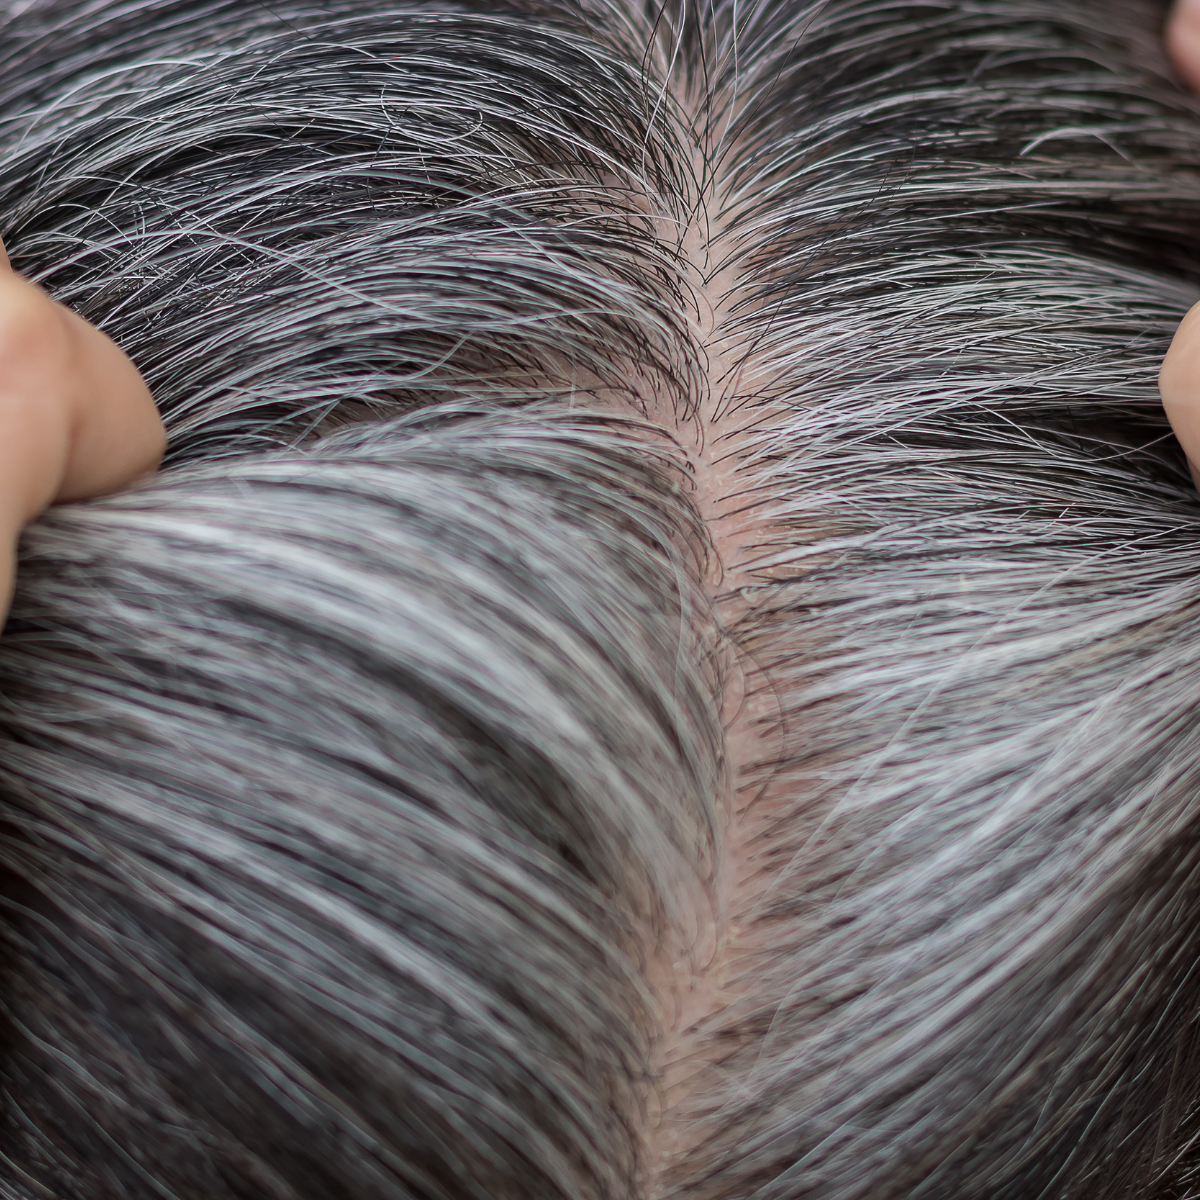 9 Solutions to stop grey hair naturally